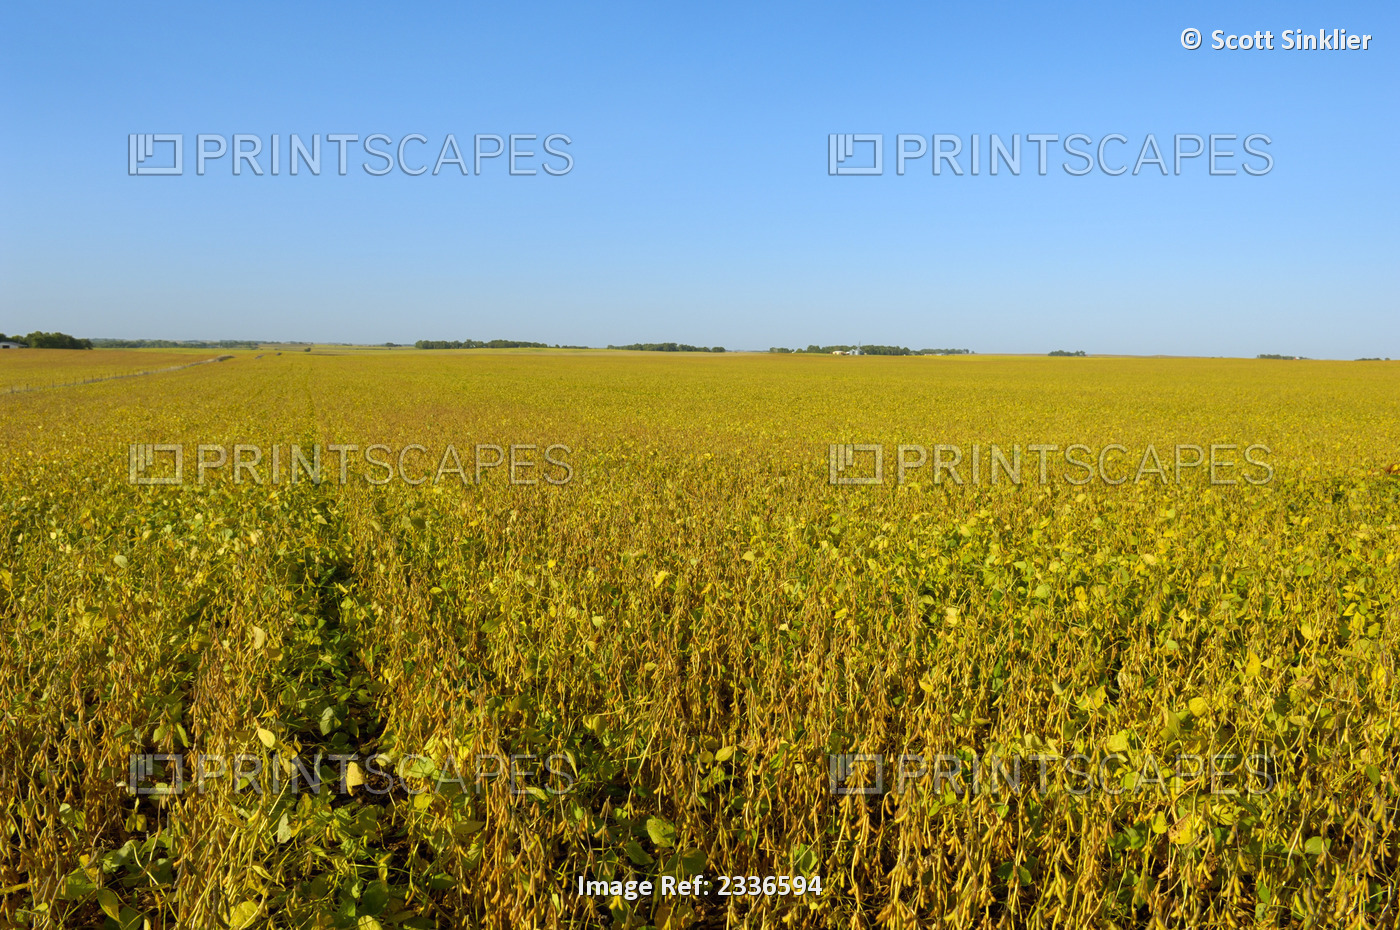 Agriculture - Large field of mature late season soybeans / Central Iowa, USA.